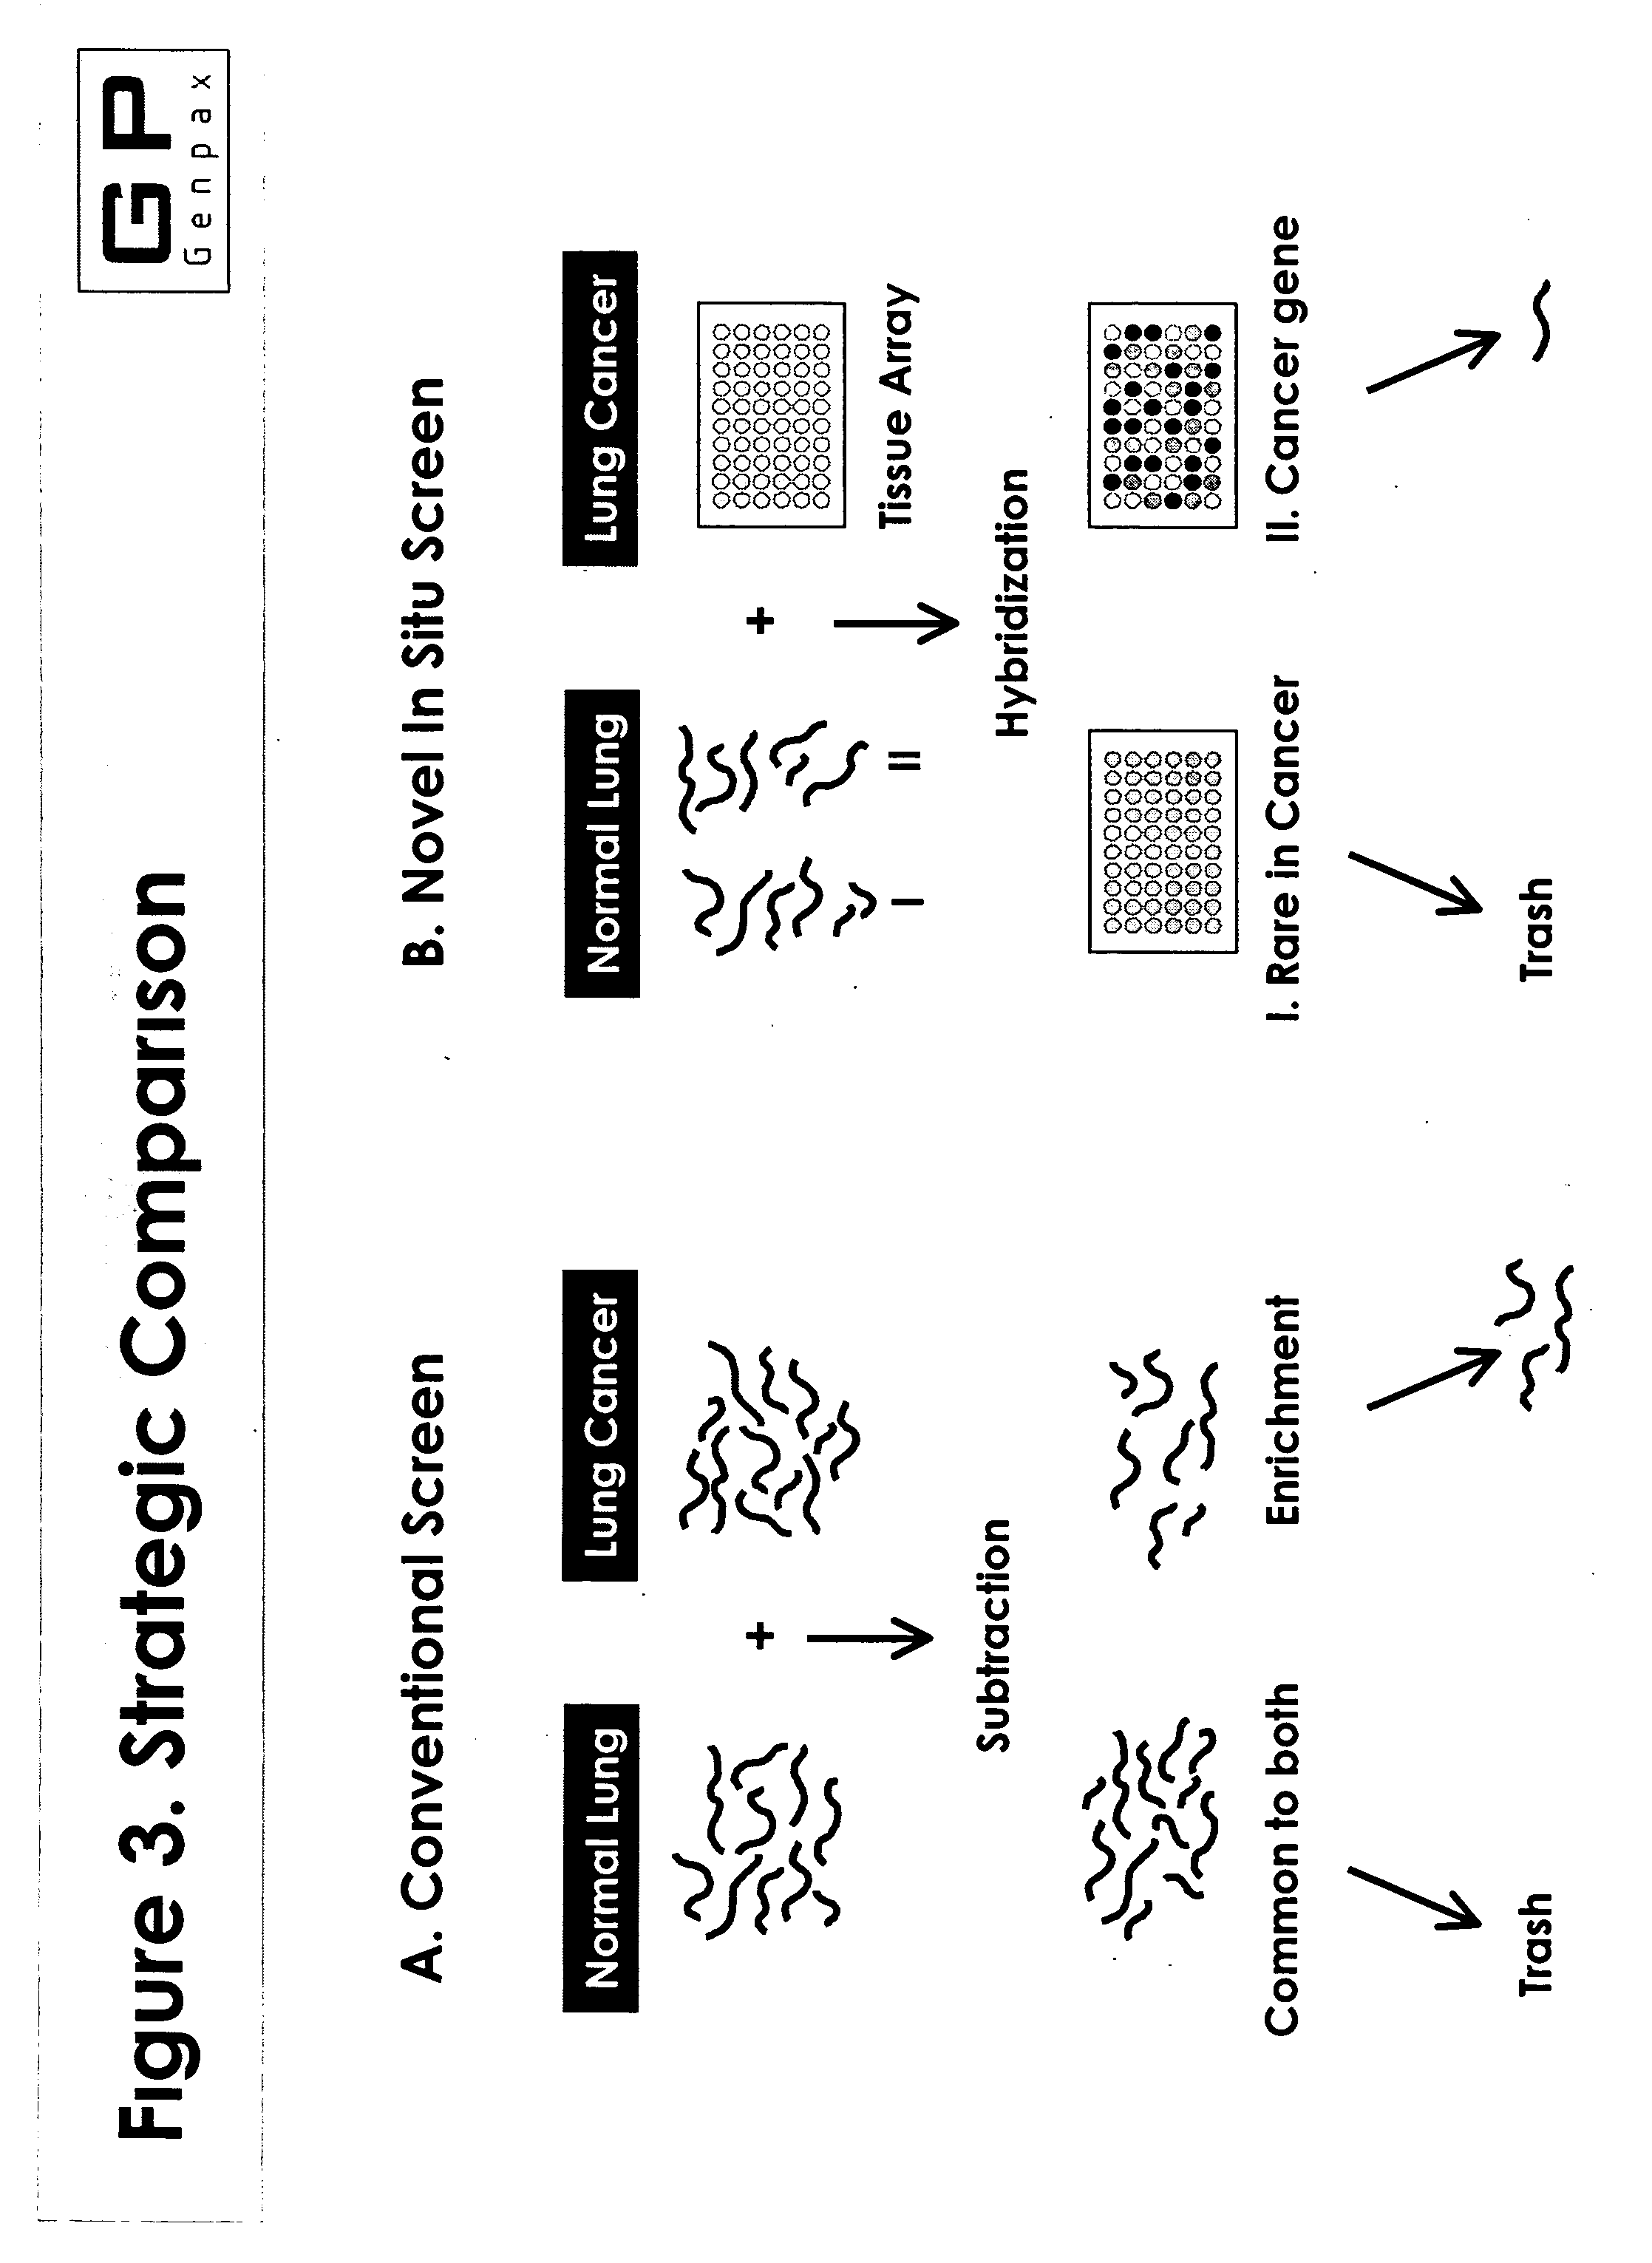 Novel composition and methods for the diagnosis of lung cancer